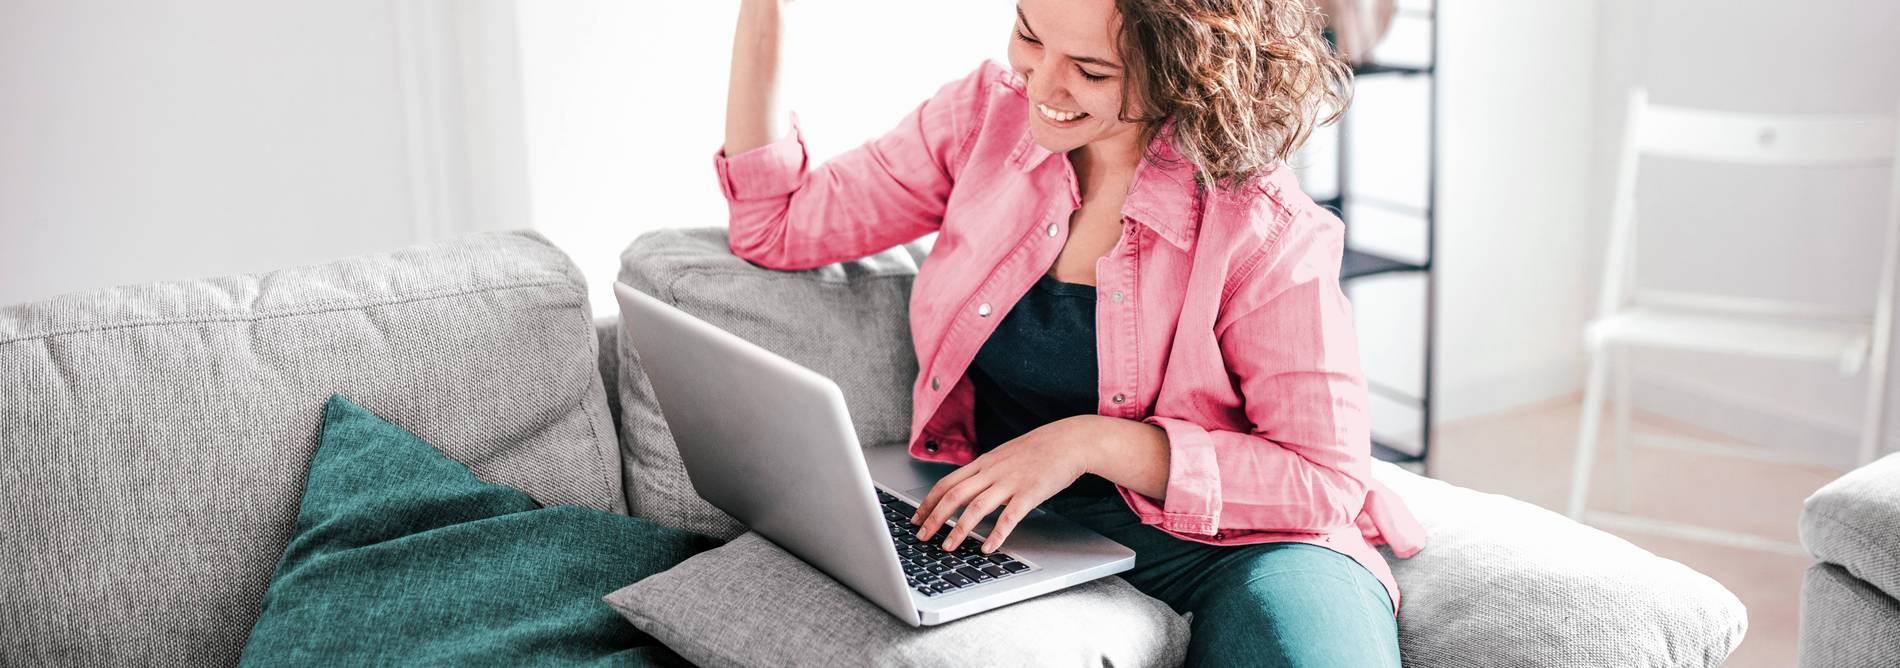 Woman shopping on secure website on laptop